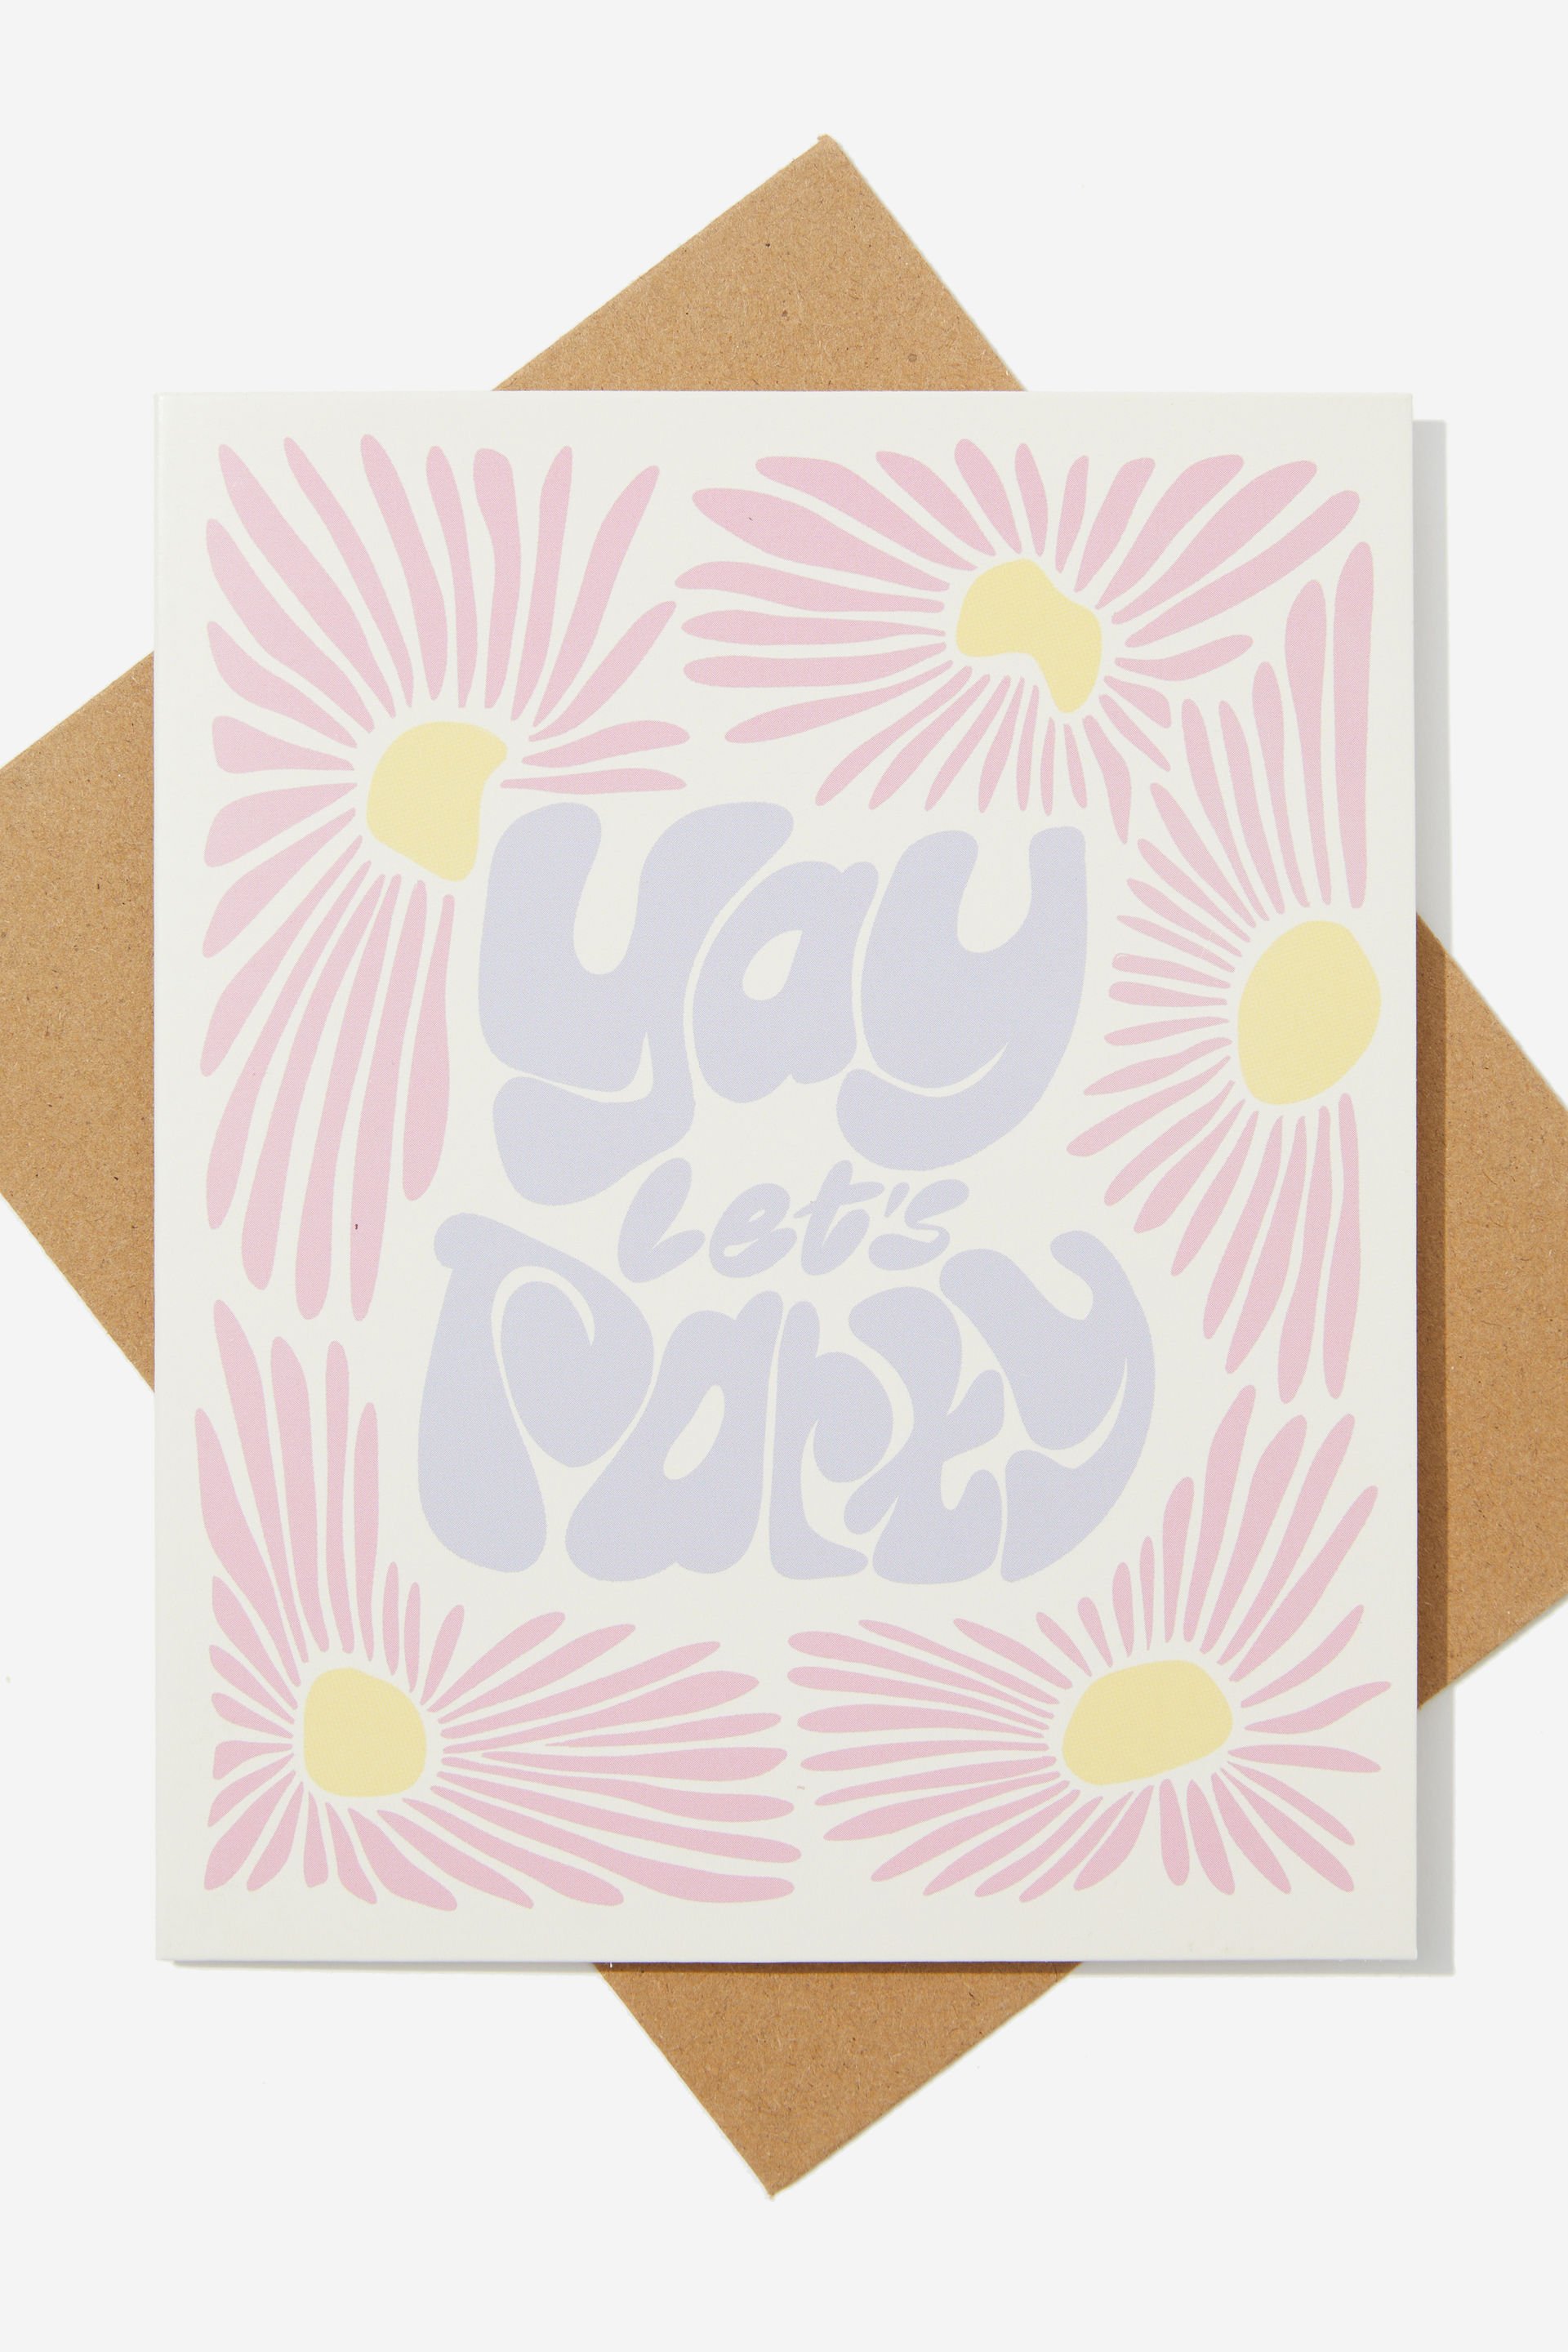 Typo - Nice Birthday Card - Yay let’s party